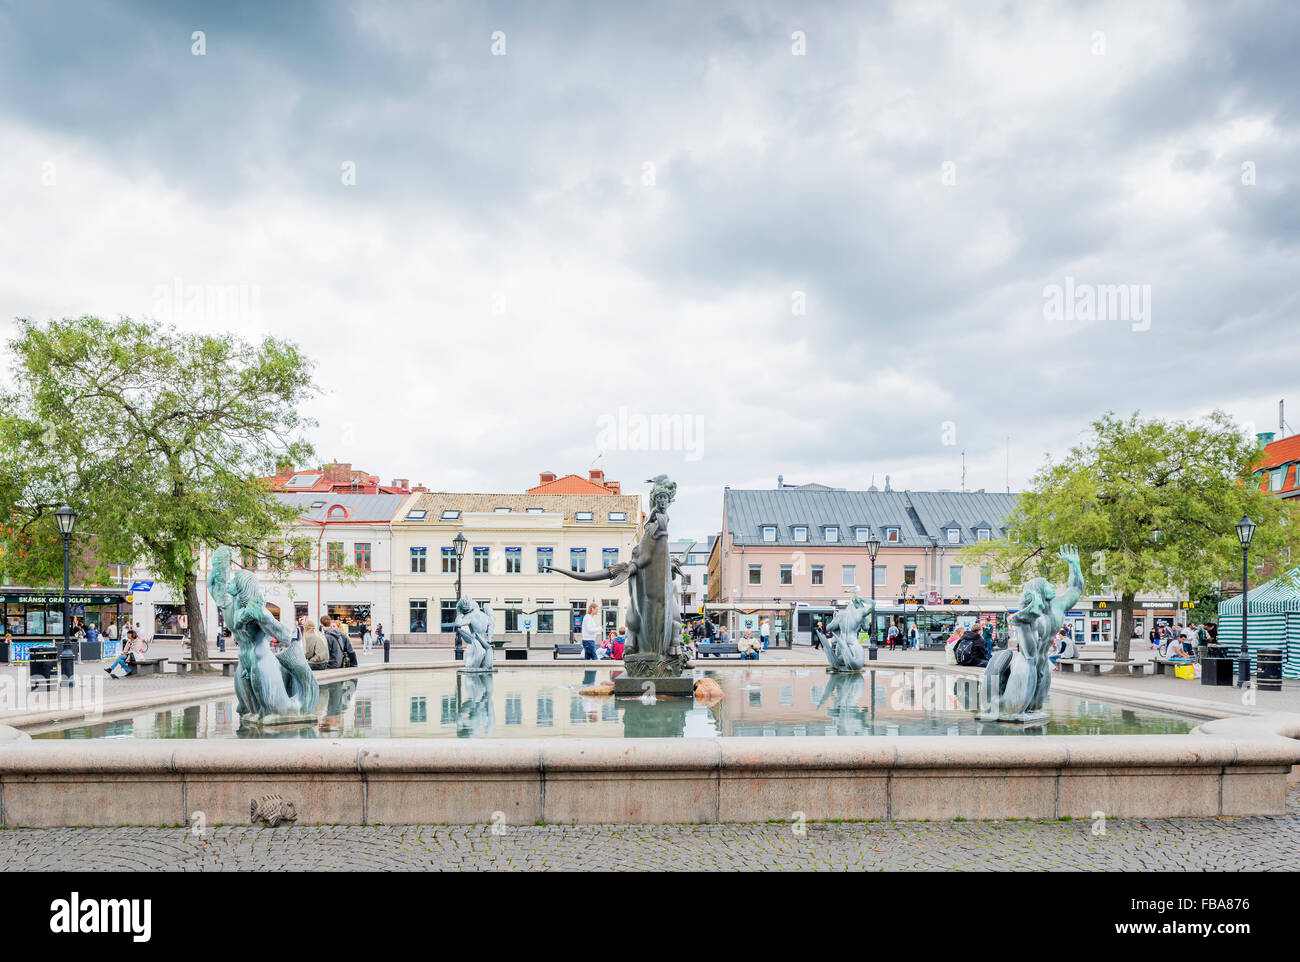 Sweden, Halland, Halmstad, Storatorg, Europa and Bull statue in fountain with buildings in background Stock Photo